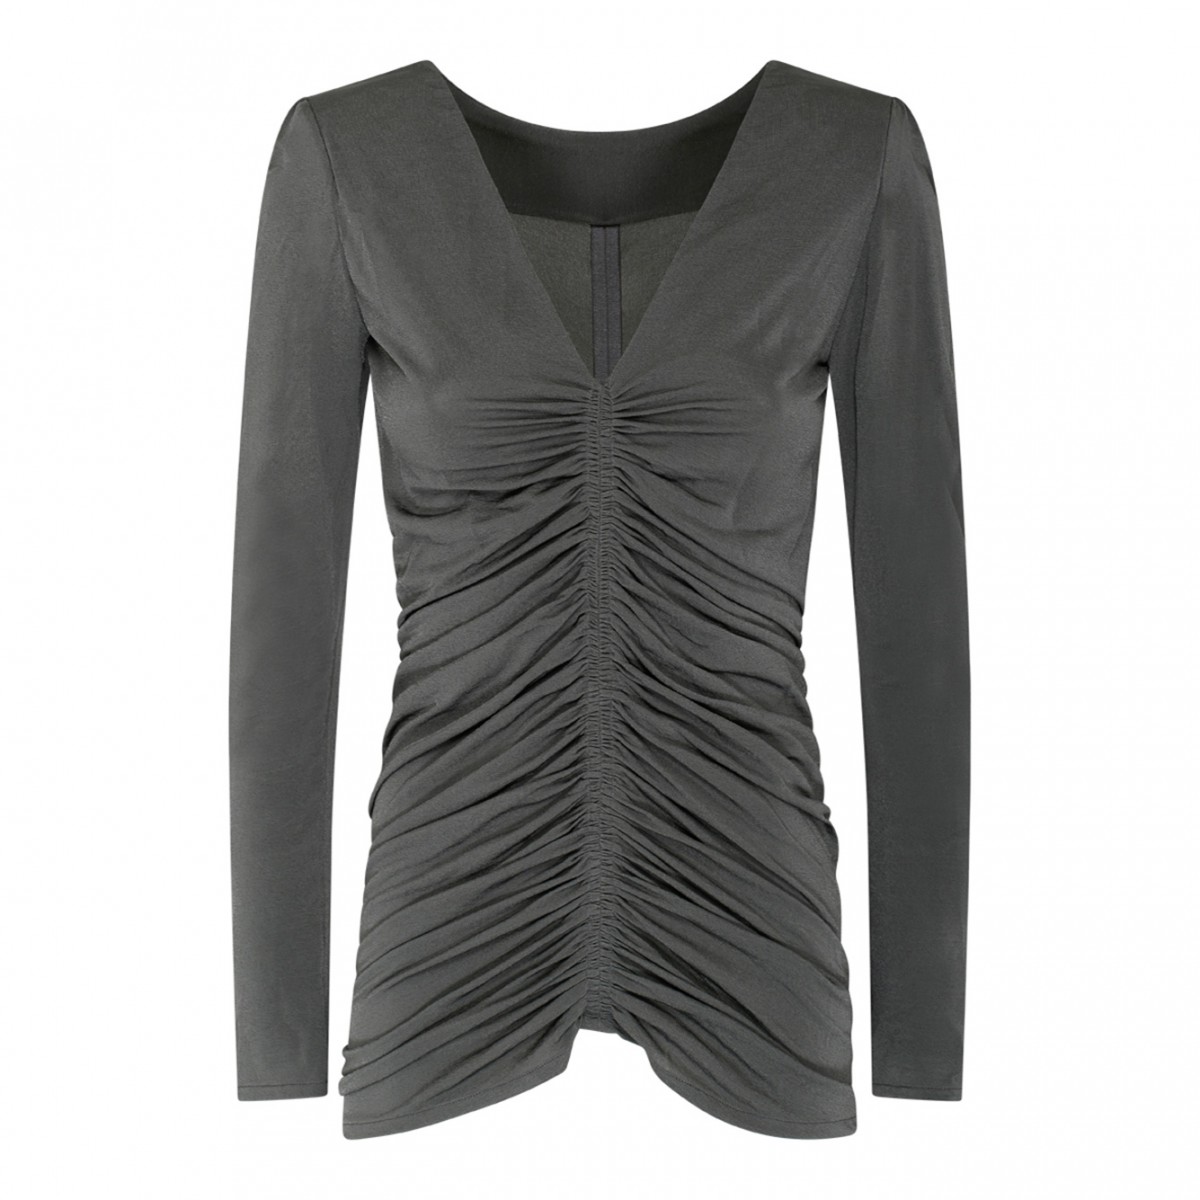 Givenchy Grey Ruched Long Sleeved Top.